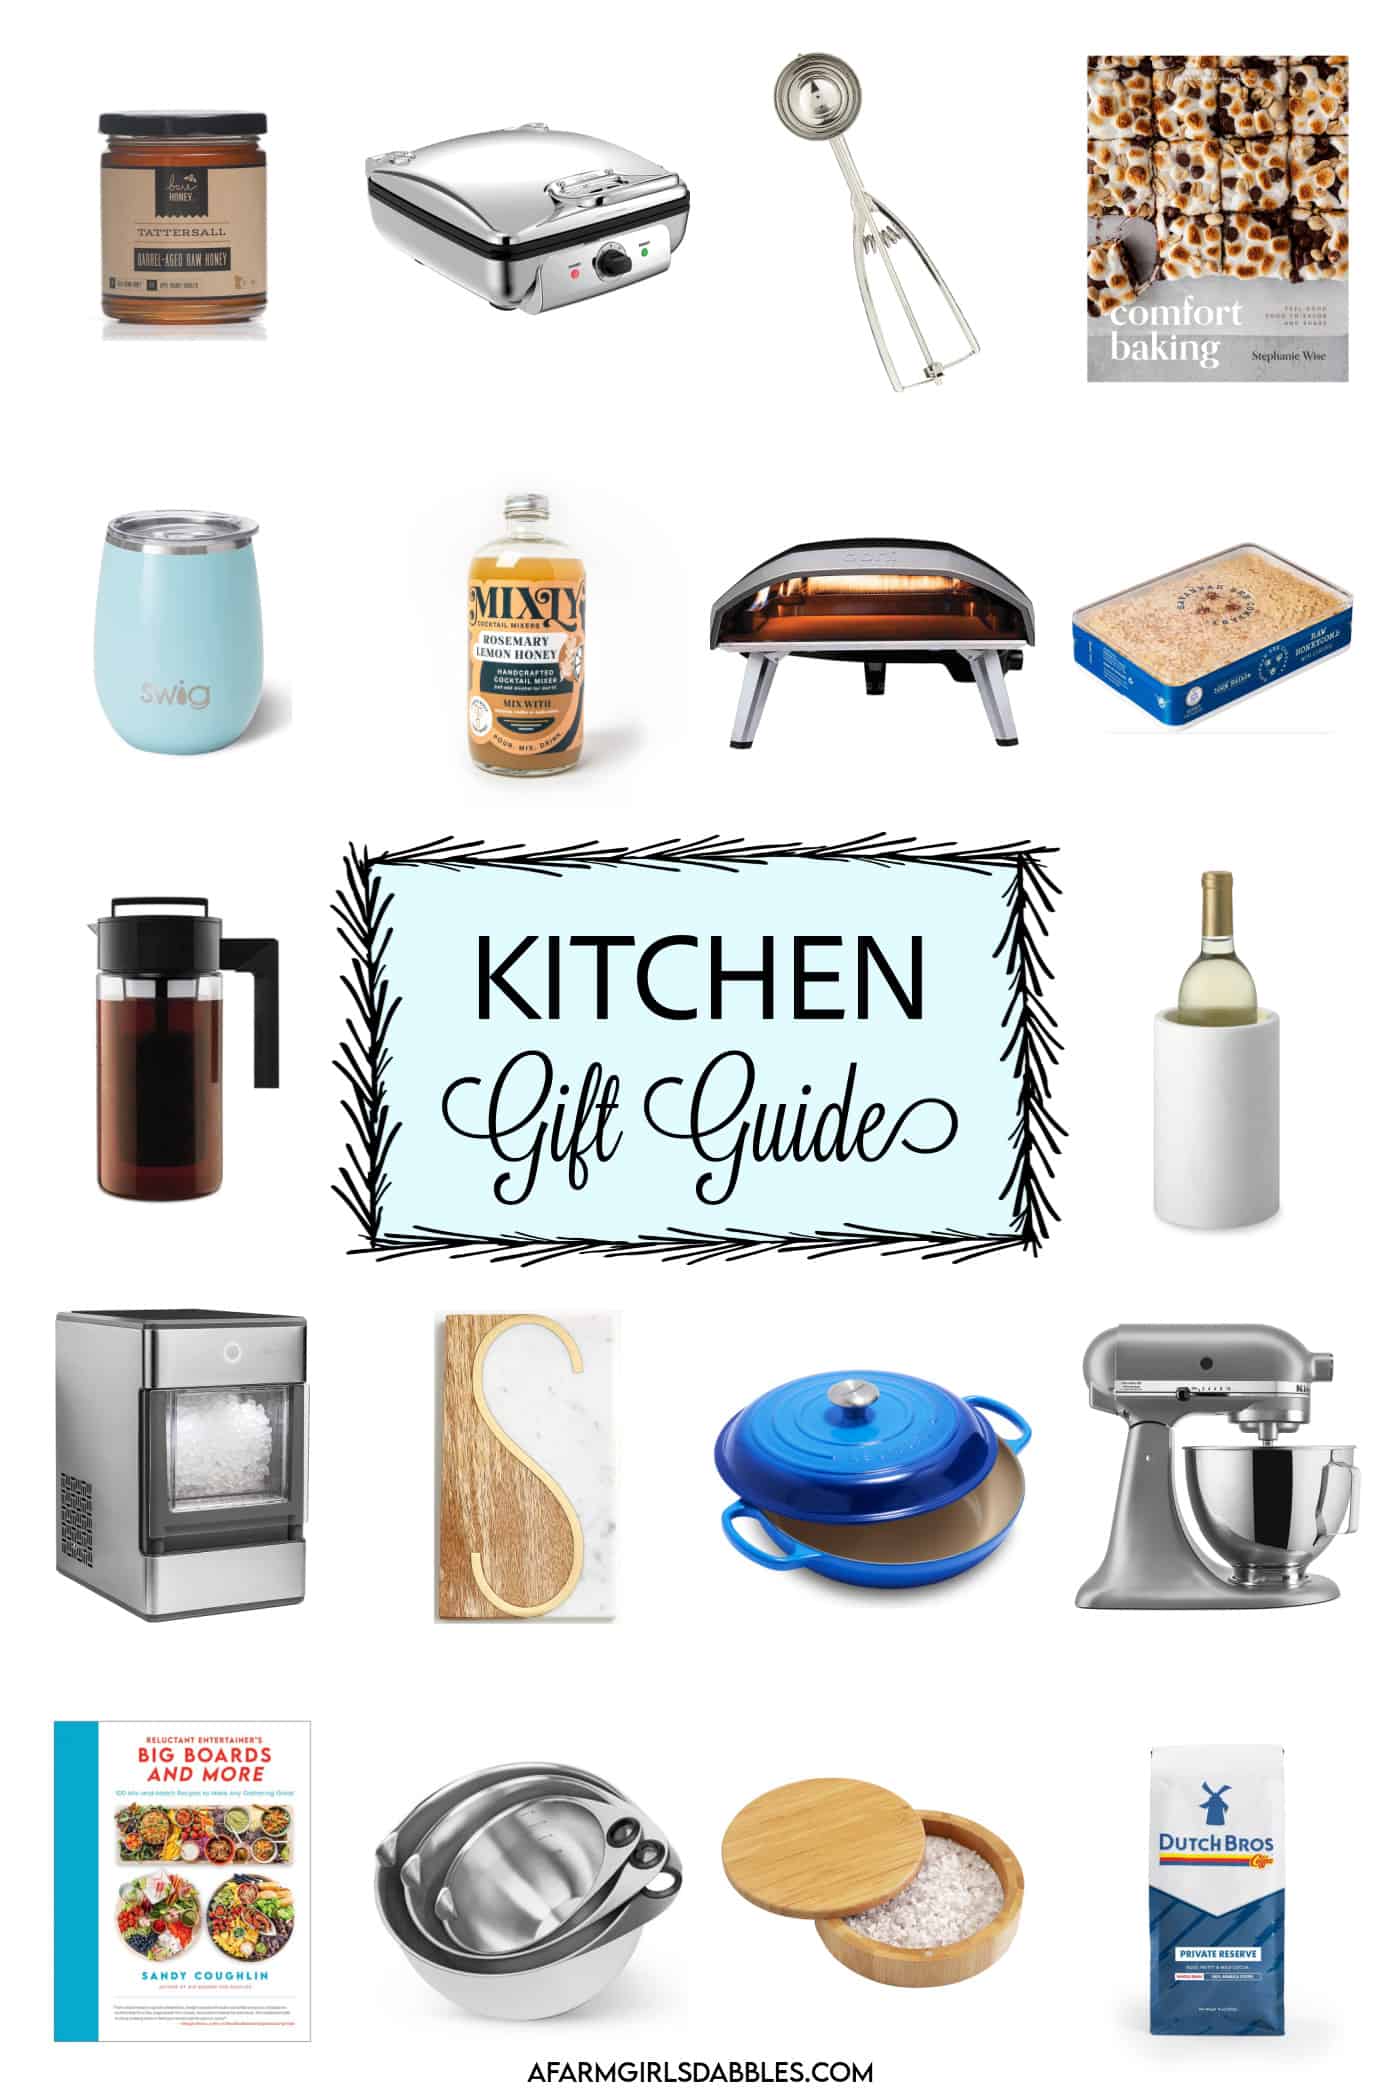 Best and Most Useful Kitchen Gadgets, 2022 Guide